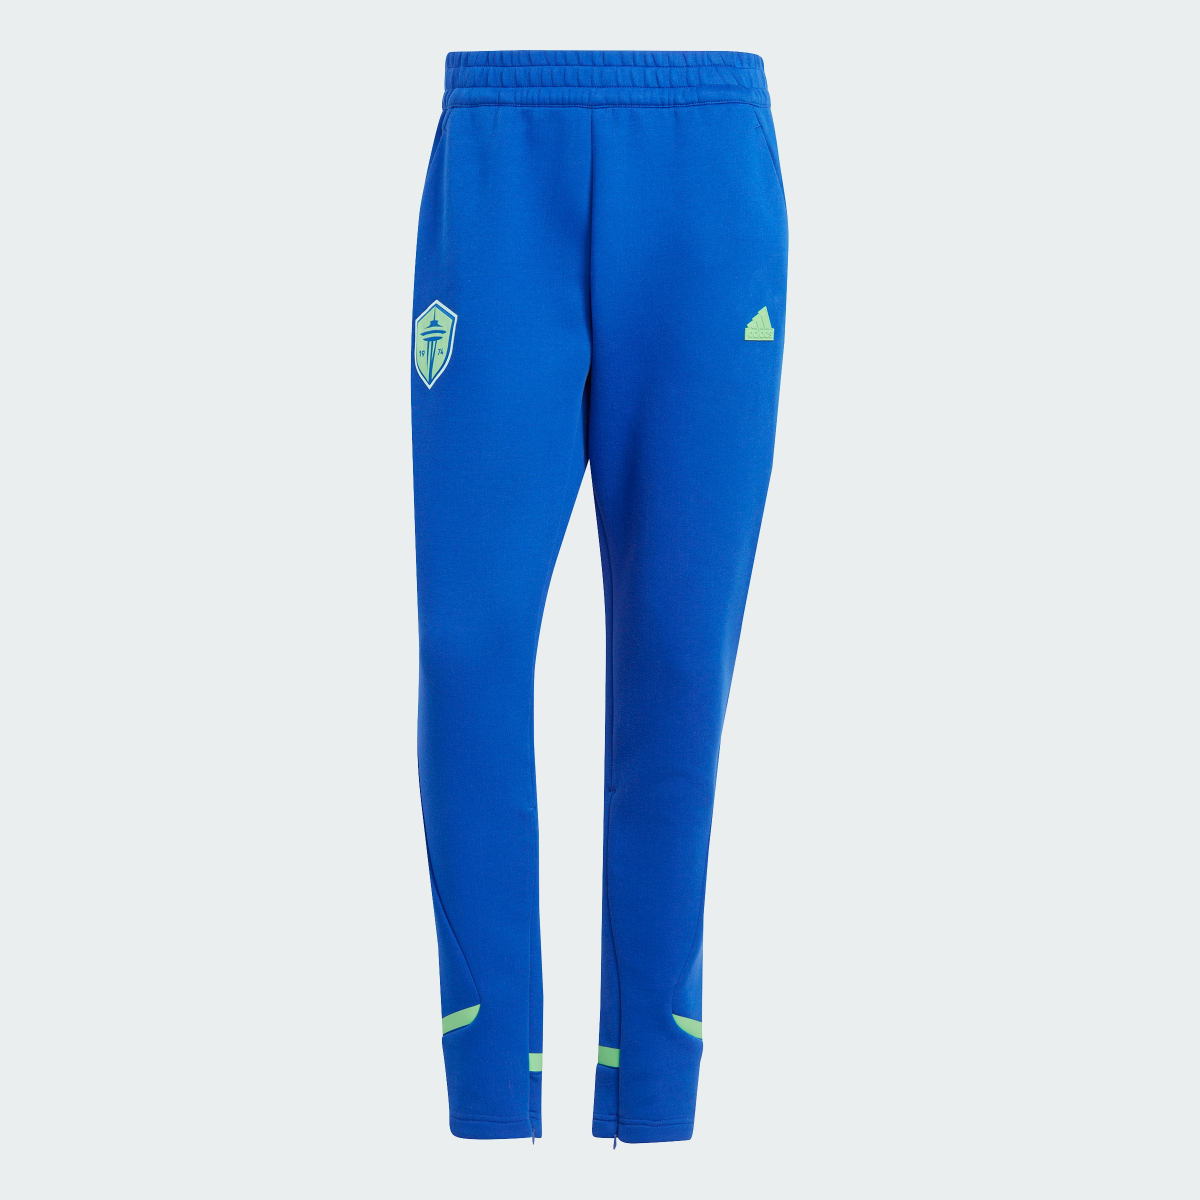 Adidas Seattle Sounders FC Designed for Gameday Travel Pants. 4